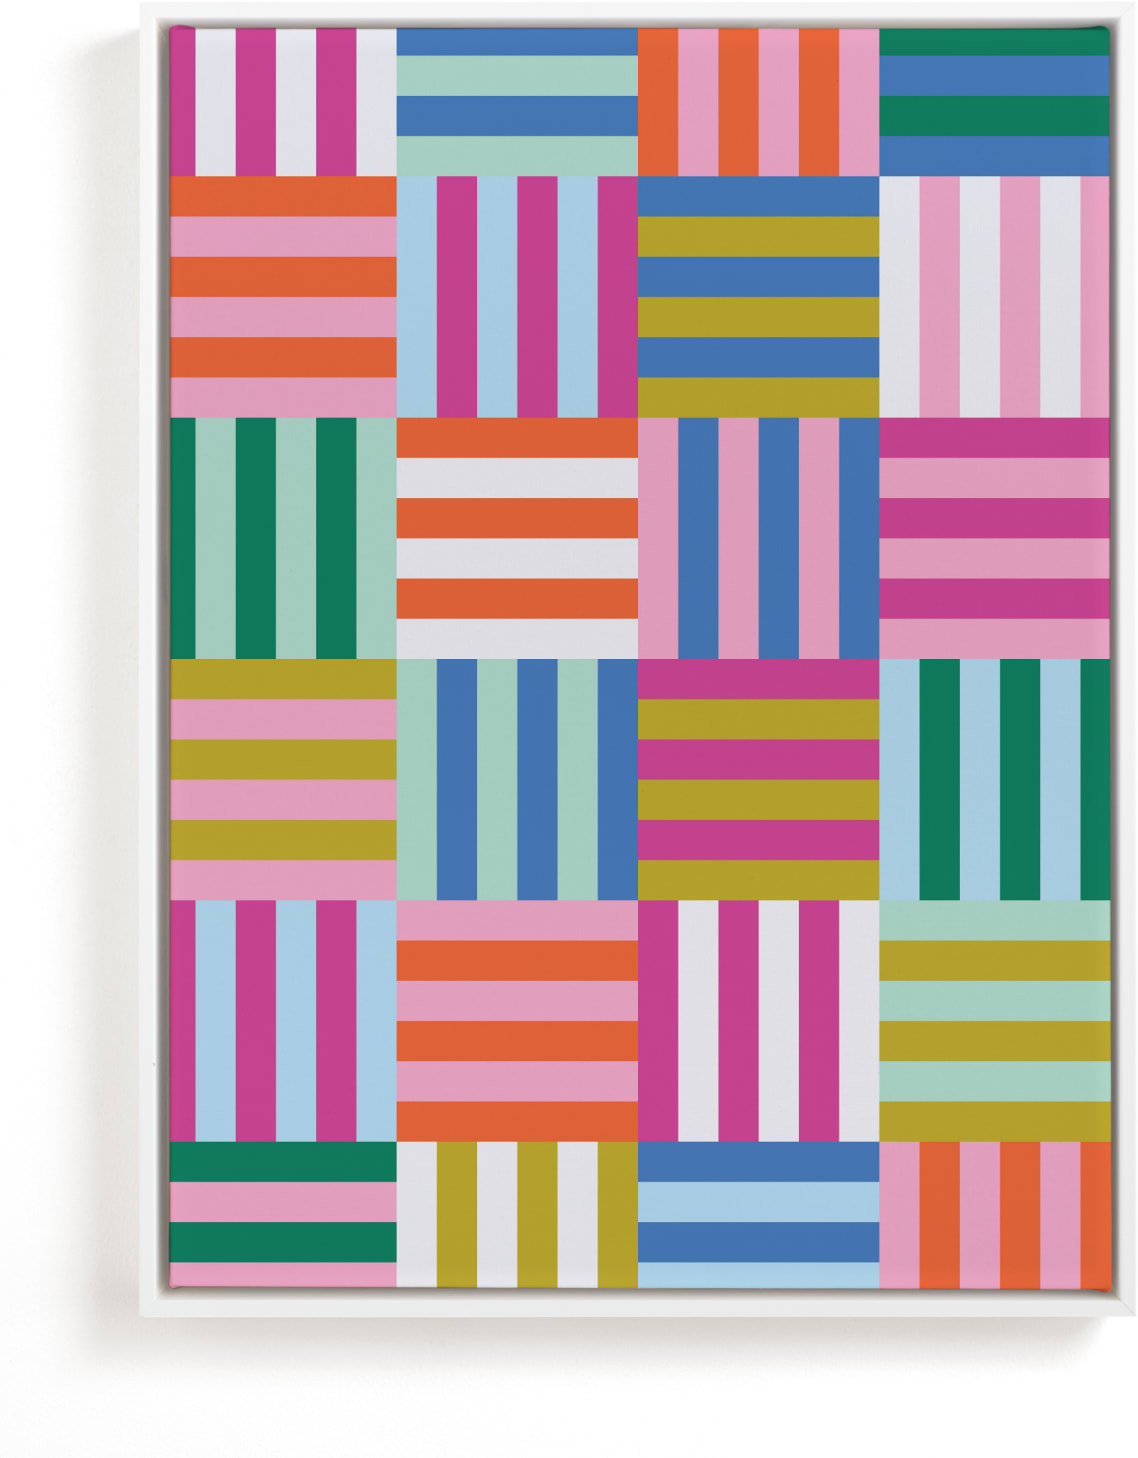 This is a blue, pink, orange kids wall art by Ashes and Ivy Studio called Not your average checkers.